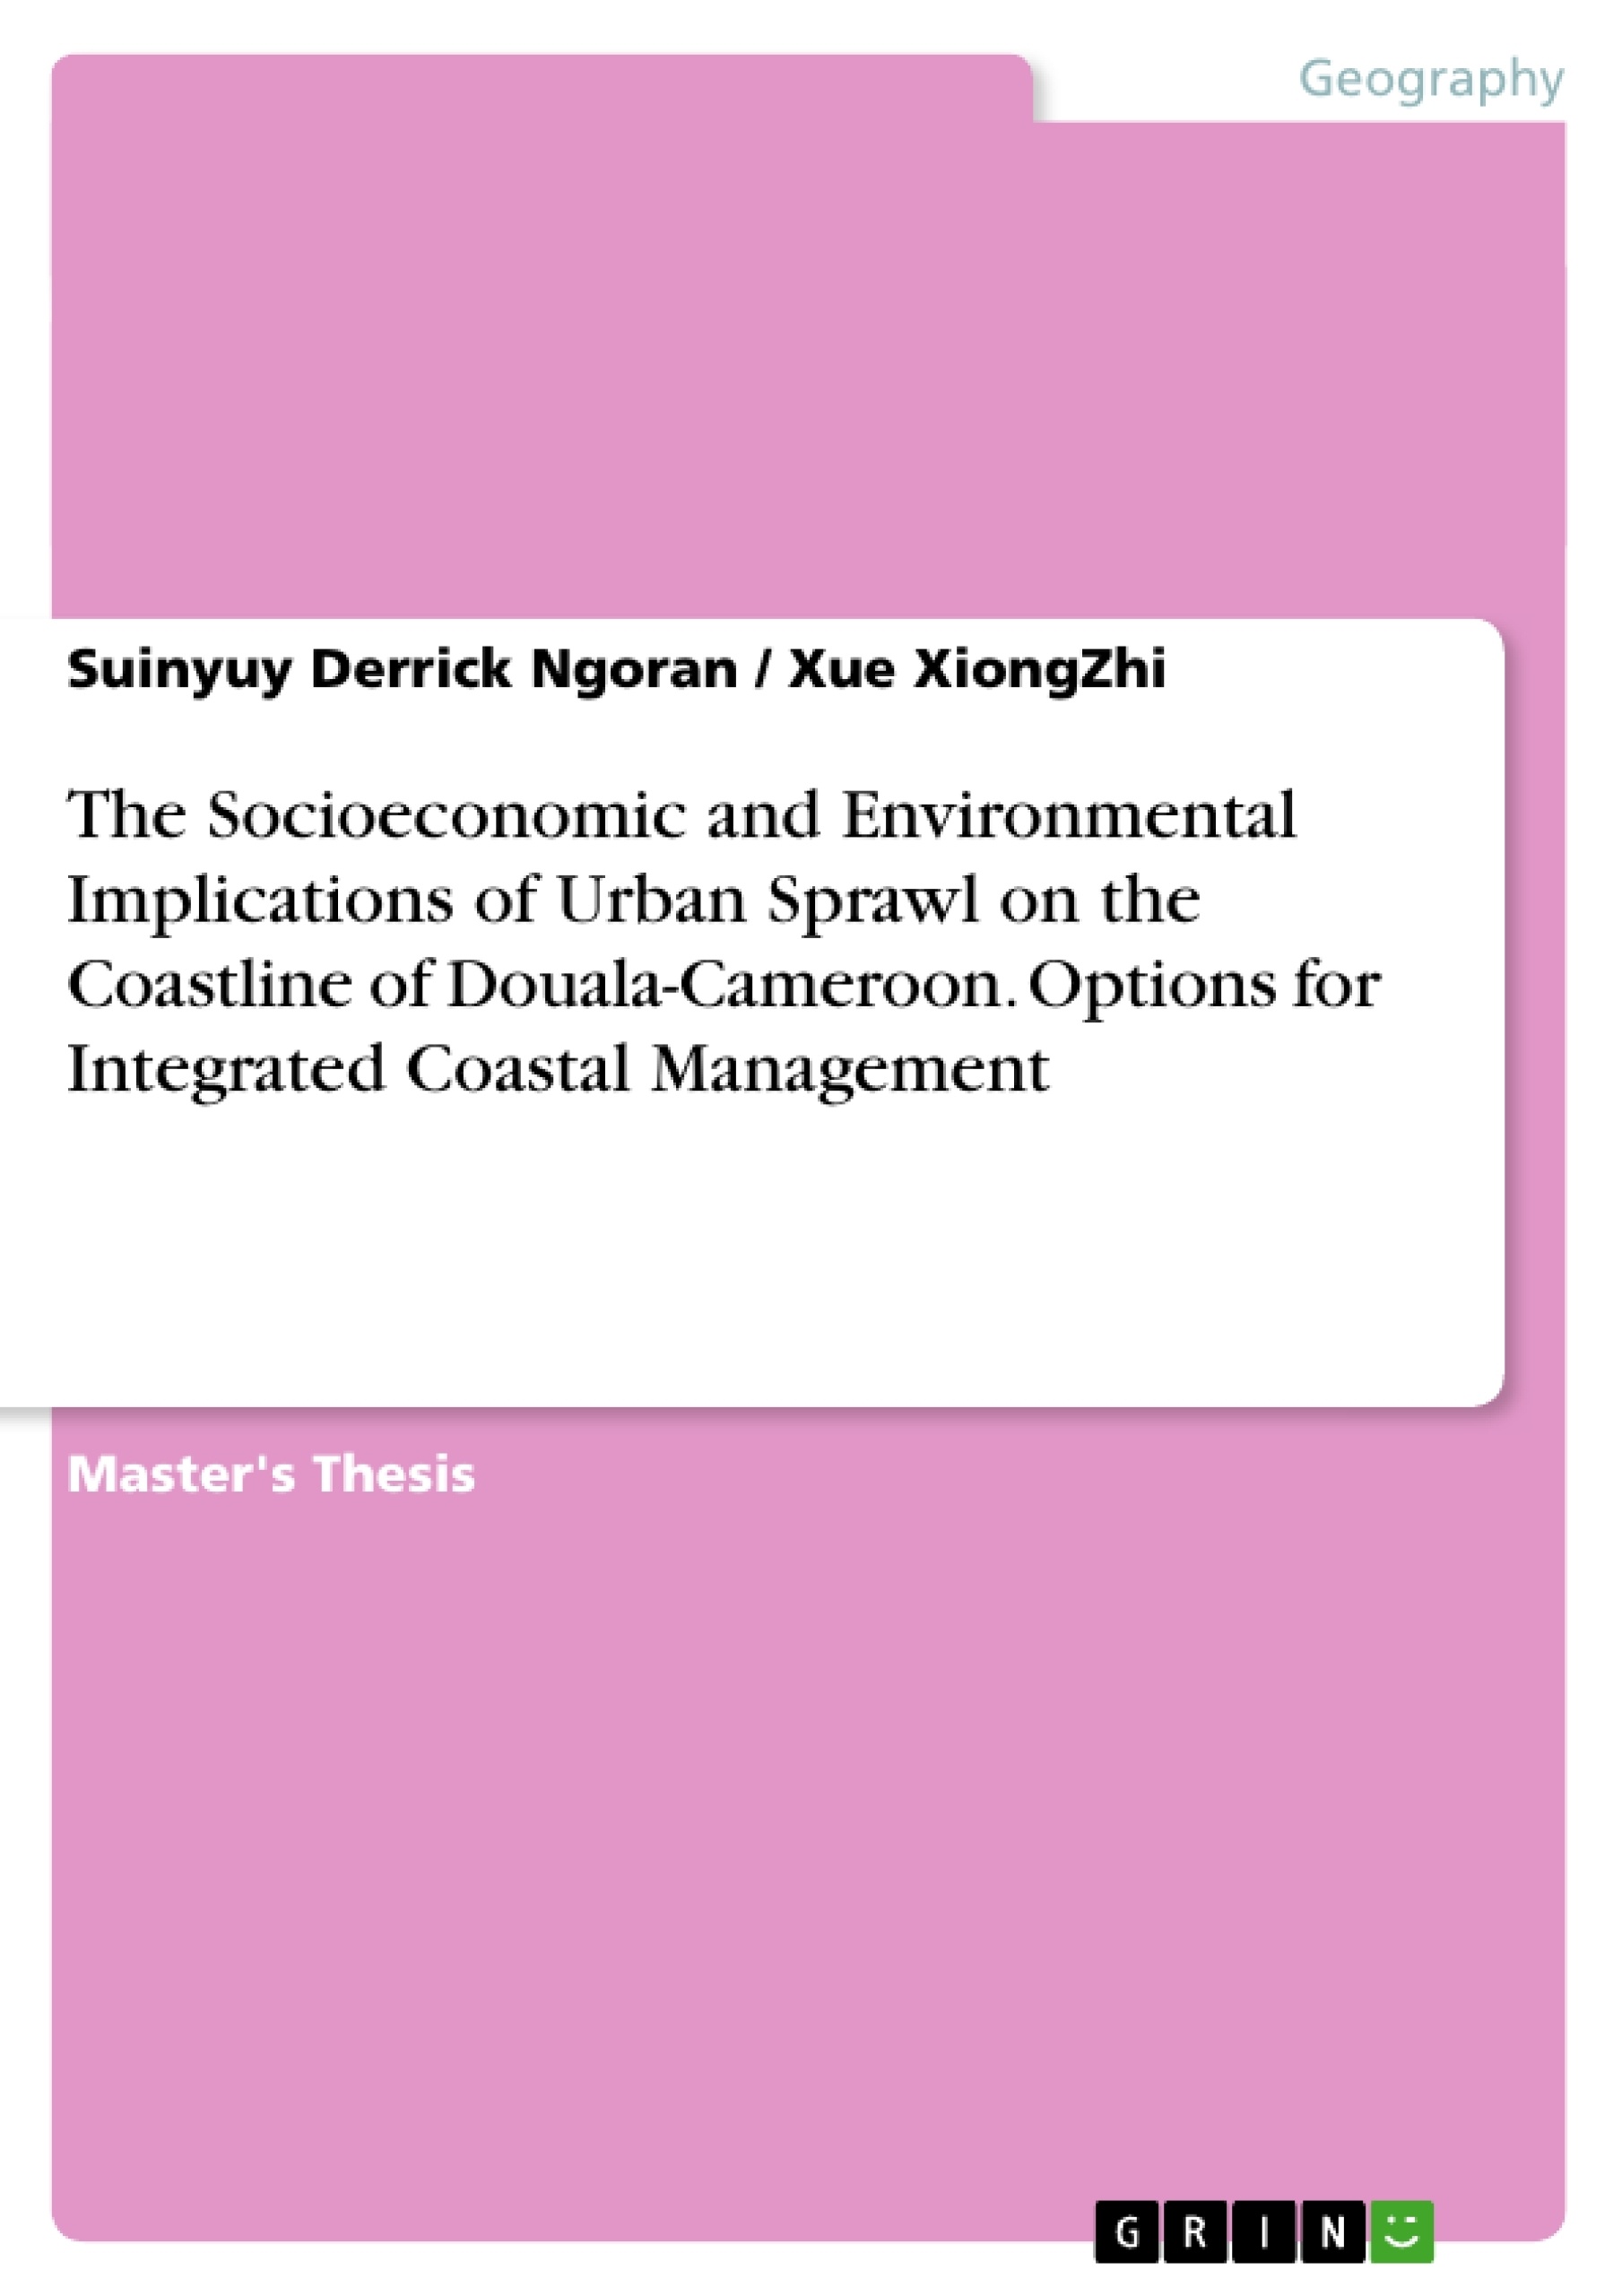 Title: The Socioeconomic and Environmental Implications of Urban Sprawl on the Coastline of Douala-Cameroon. Options for Integrated Coastal Management